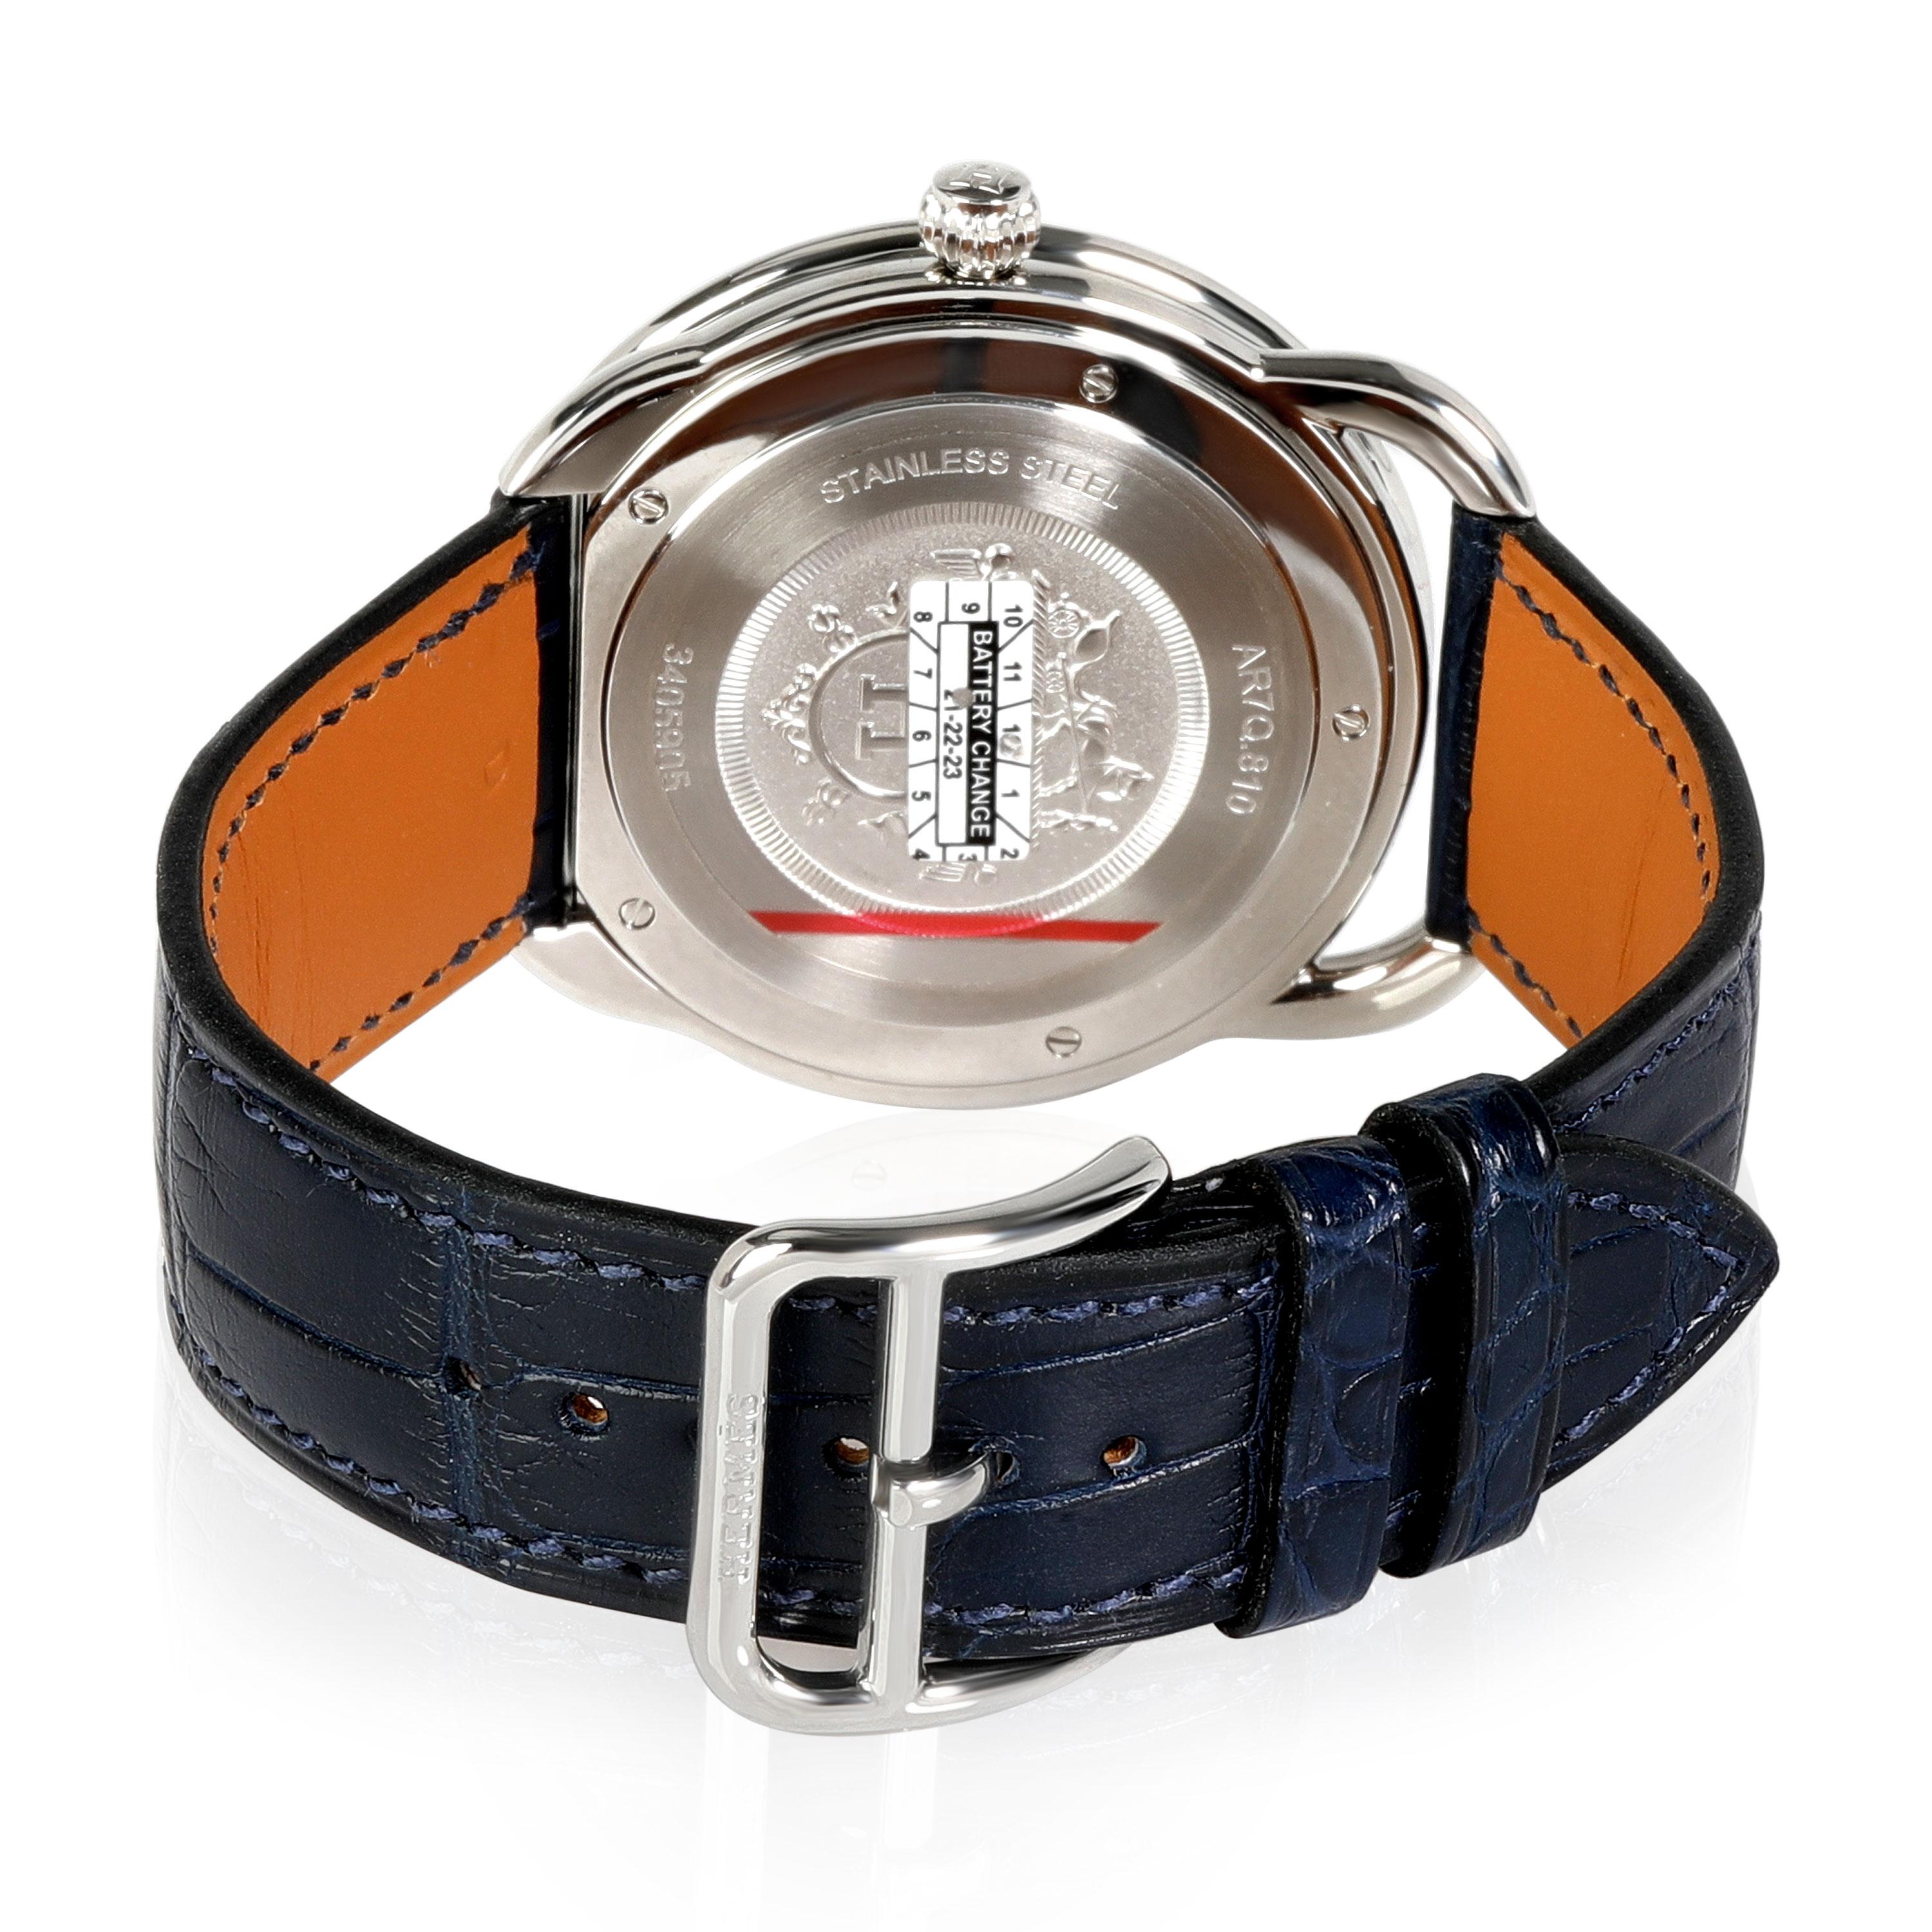 Hermès Arceau AR7Q.810 Men's Watch in  Stainless Steel

SKU: 112932

PRIMARY DETAILS
Brand: Hermès
Model: Arceau
Country of Origin: Switzerland
Movement Type: Quartz: Battery
Year Manufactured: 2020
Year of Manufacture: 2020-2029
Condition: Retail